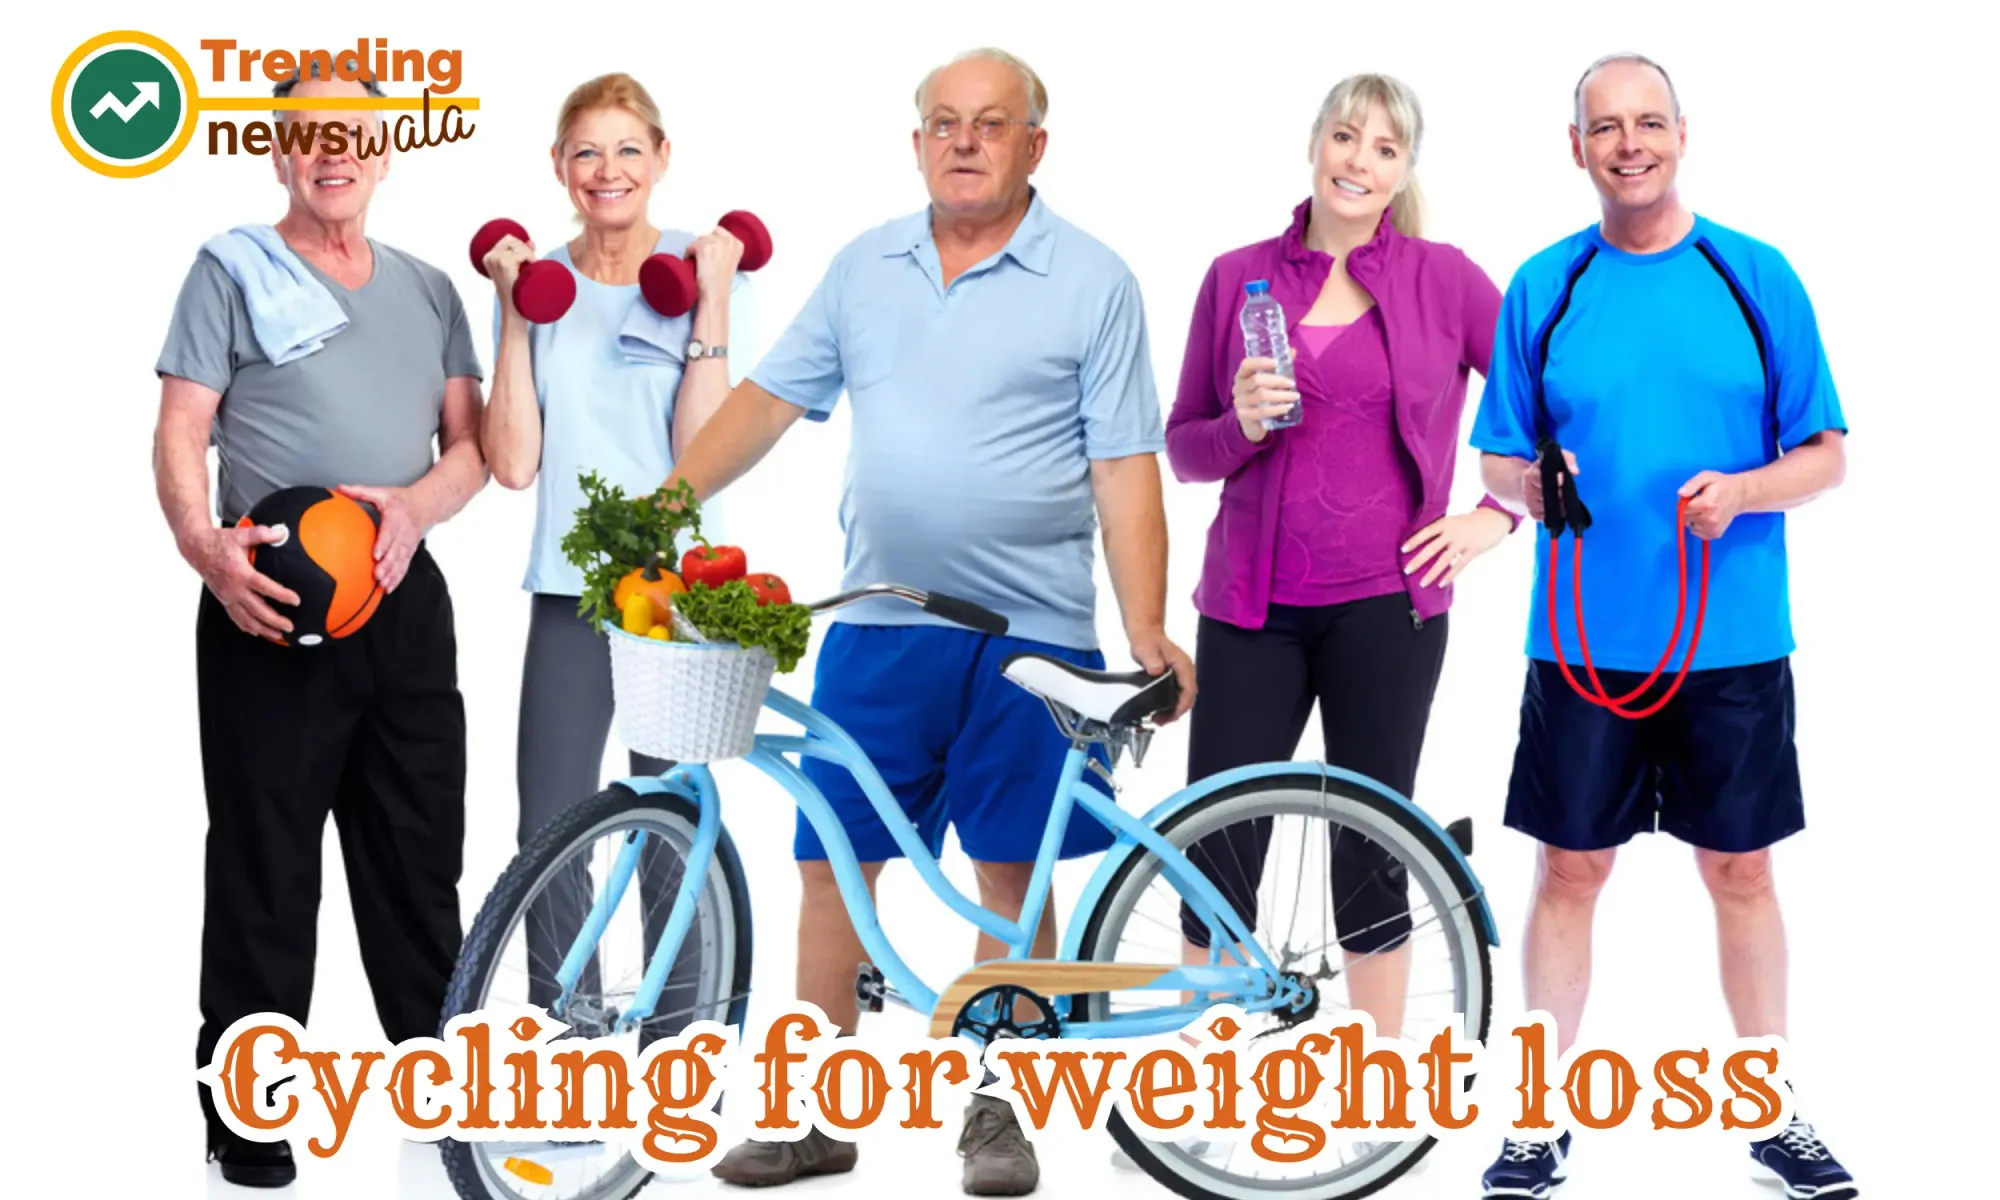 Cycling is an excellent exercise for weight loss, offering numerous benefits